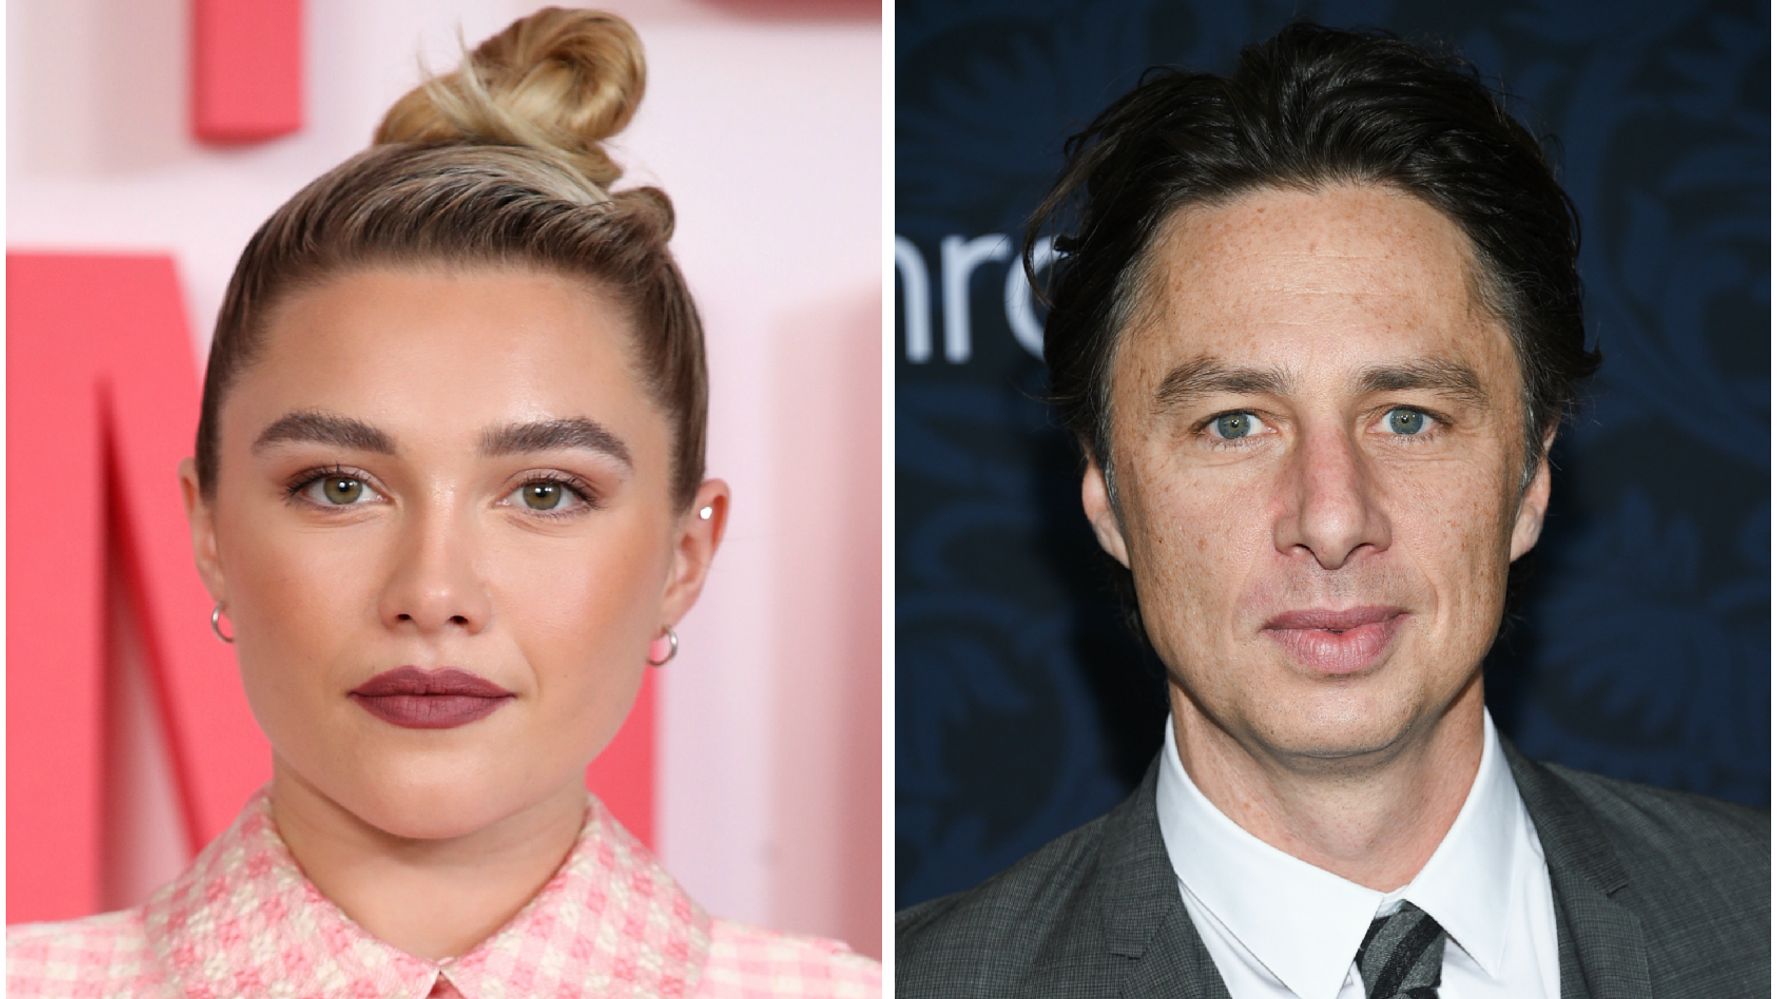 Florence Pugh Offers A Theory For Why Her Relationship With Zach Braff 'Bugs People'